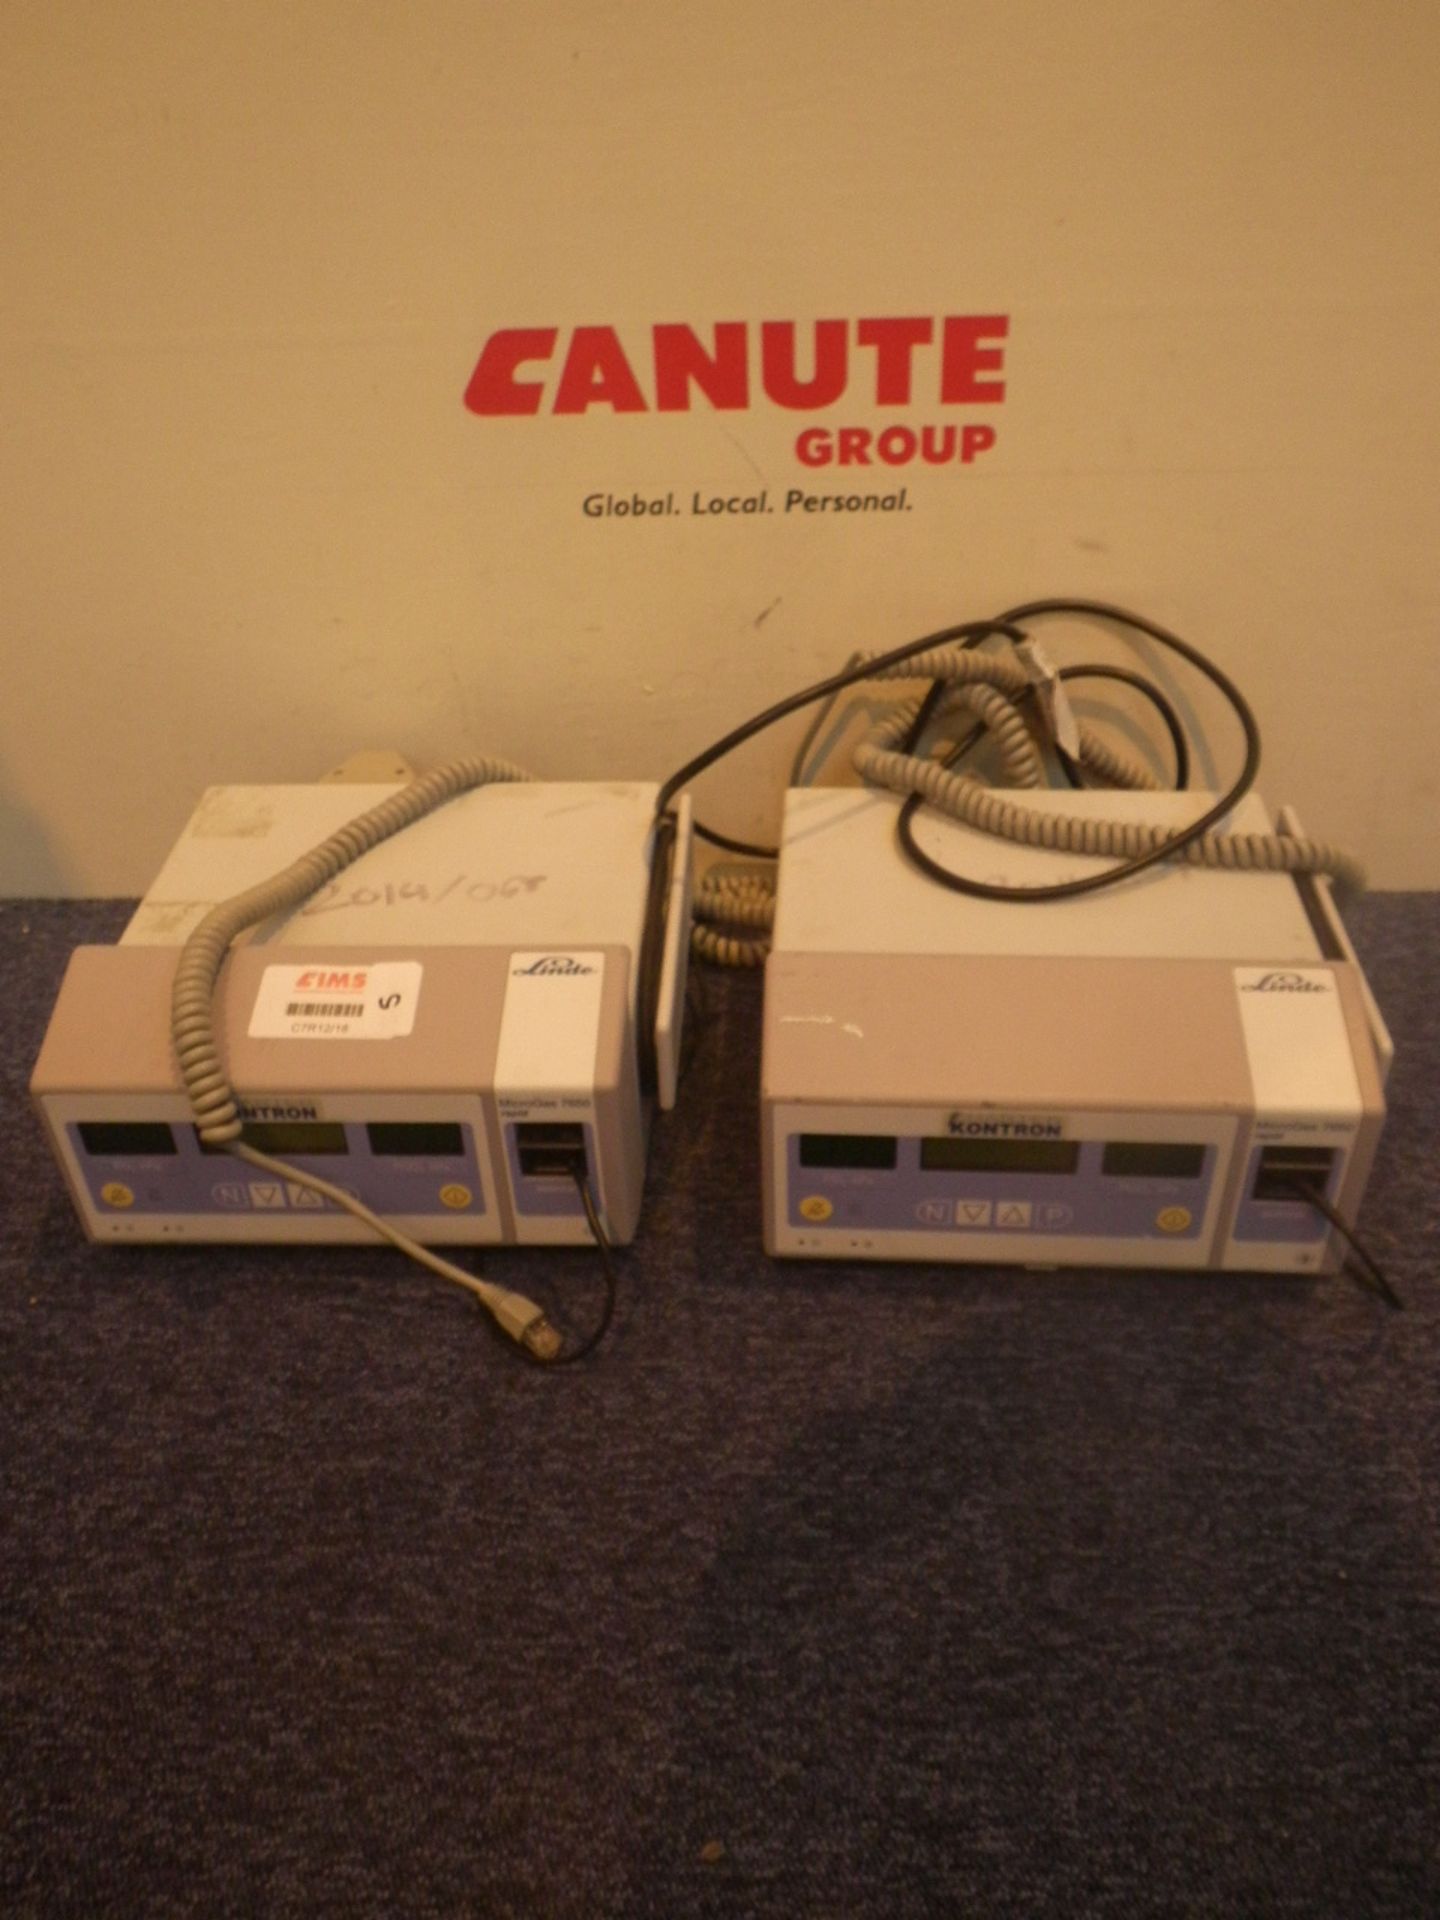 2 x Charter Kontron MicroGas 7650 Rapid Analyser *One Powers up, One doesnt*